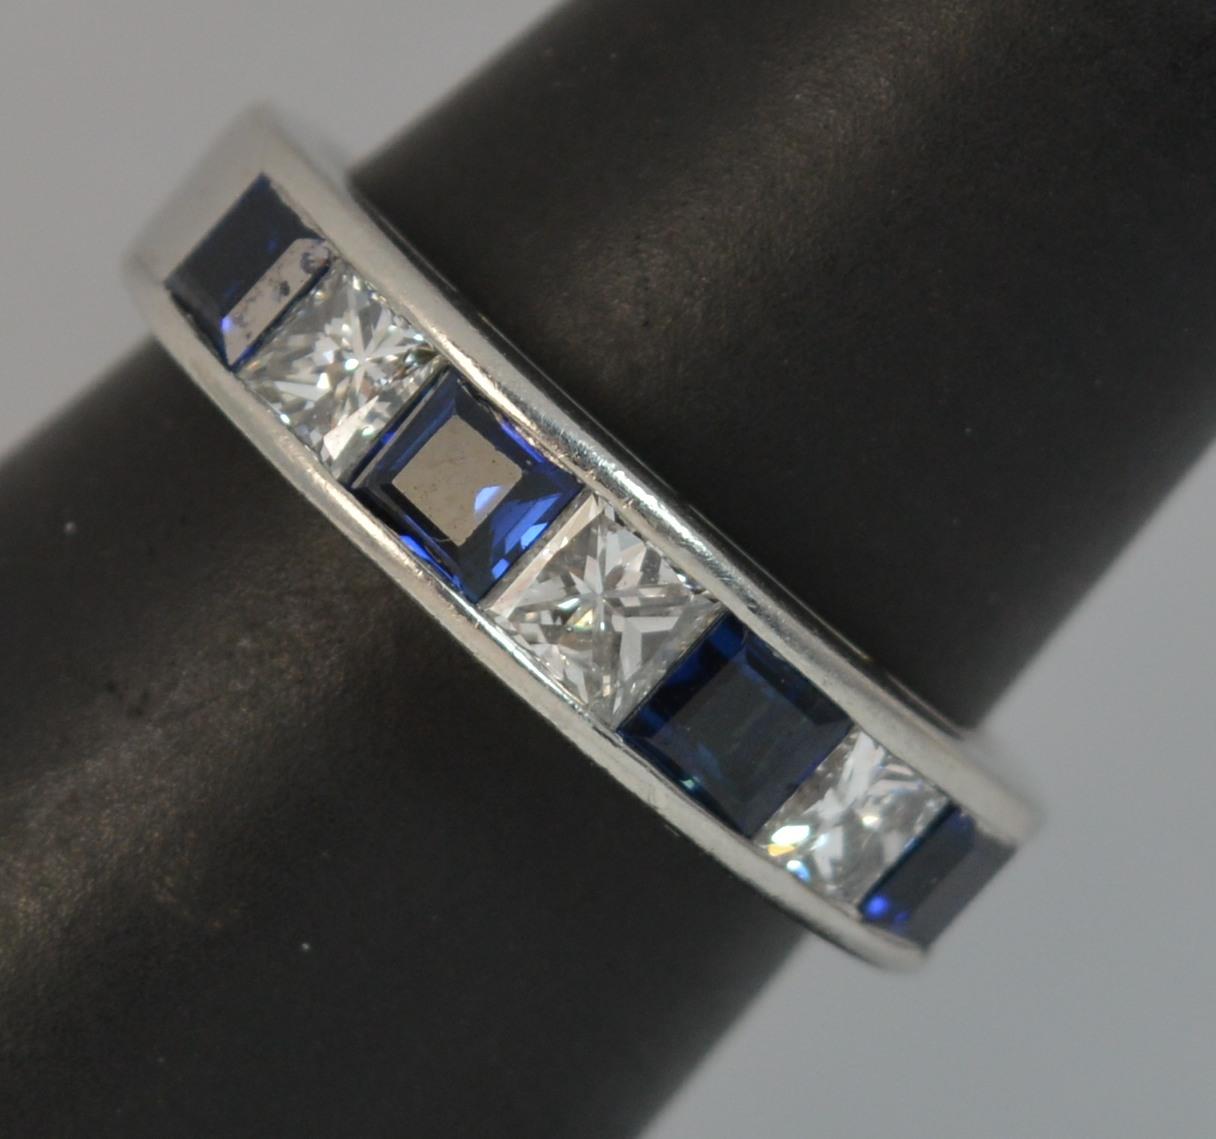 A well made and substantial cluster ring in solid hallmarked platinum.
Ring Size; N 1/2 UK, 7 US
​Designed with alternating natural princess cut Sapphires and Diamonds to form a seven stone half eternity or stack ring.

As confirmed to the shank, a